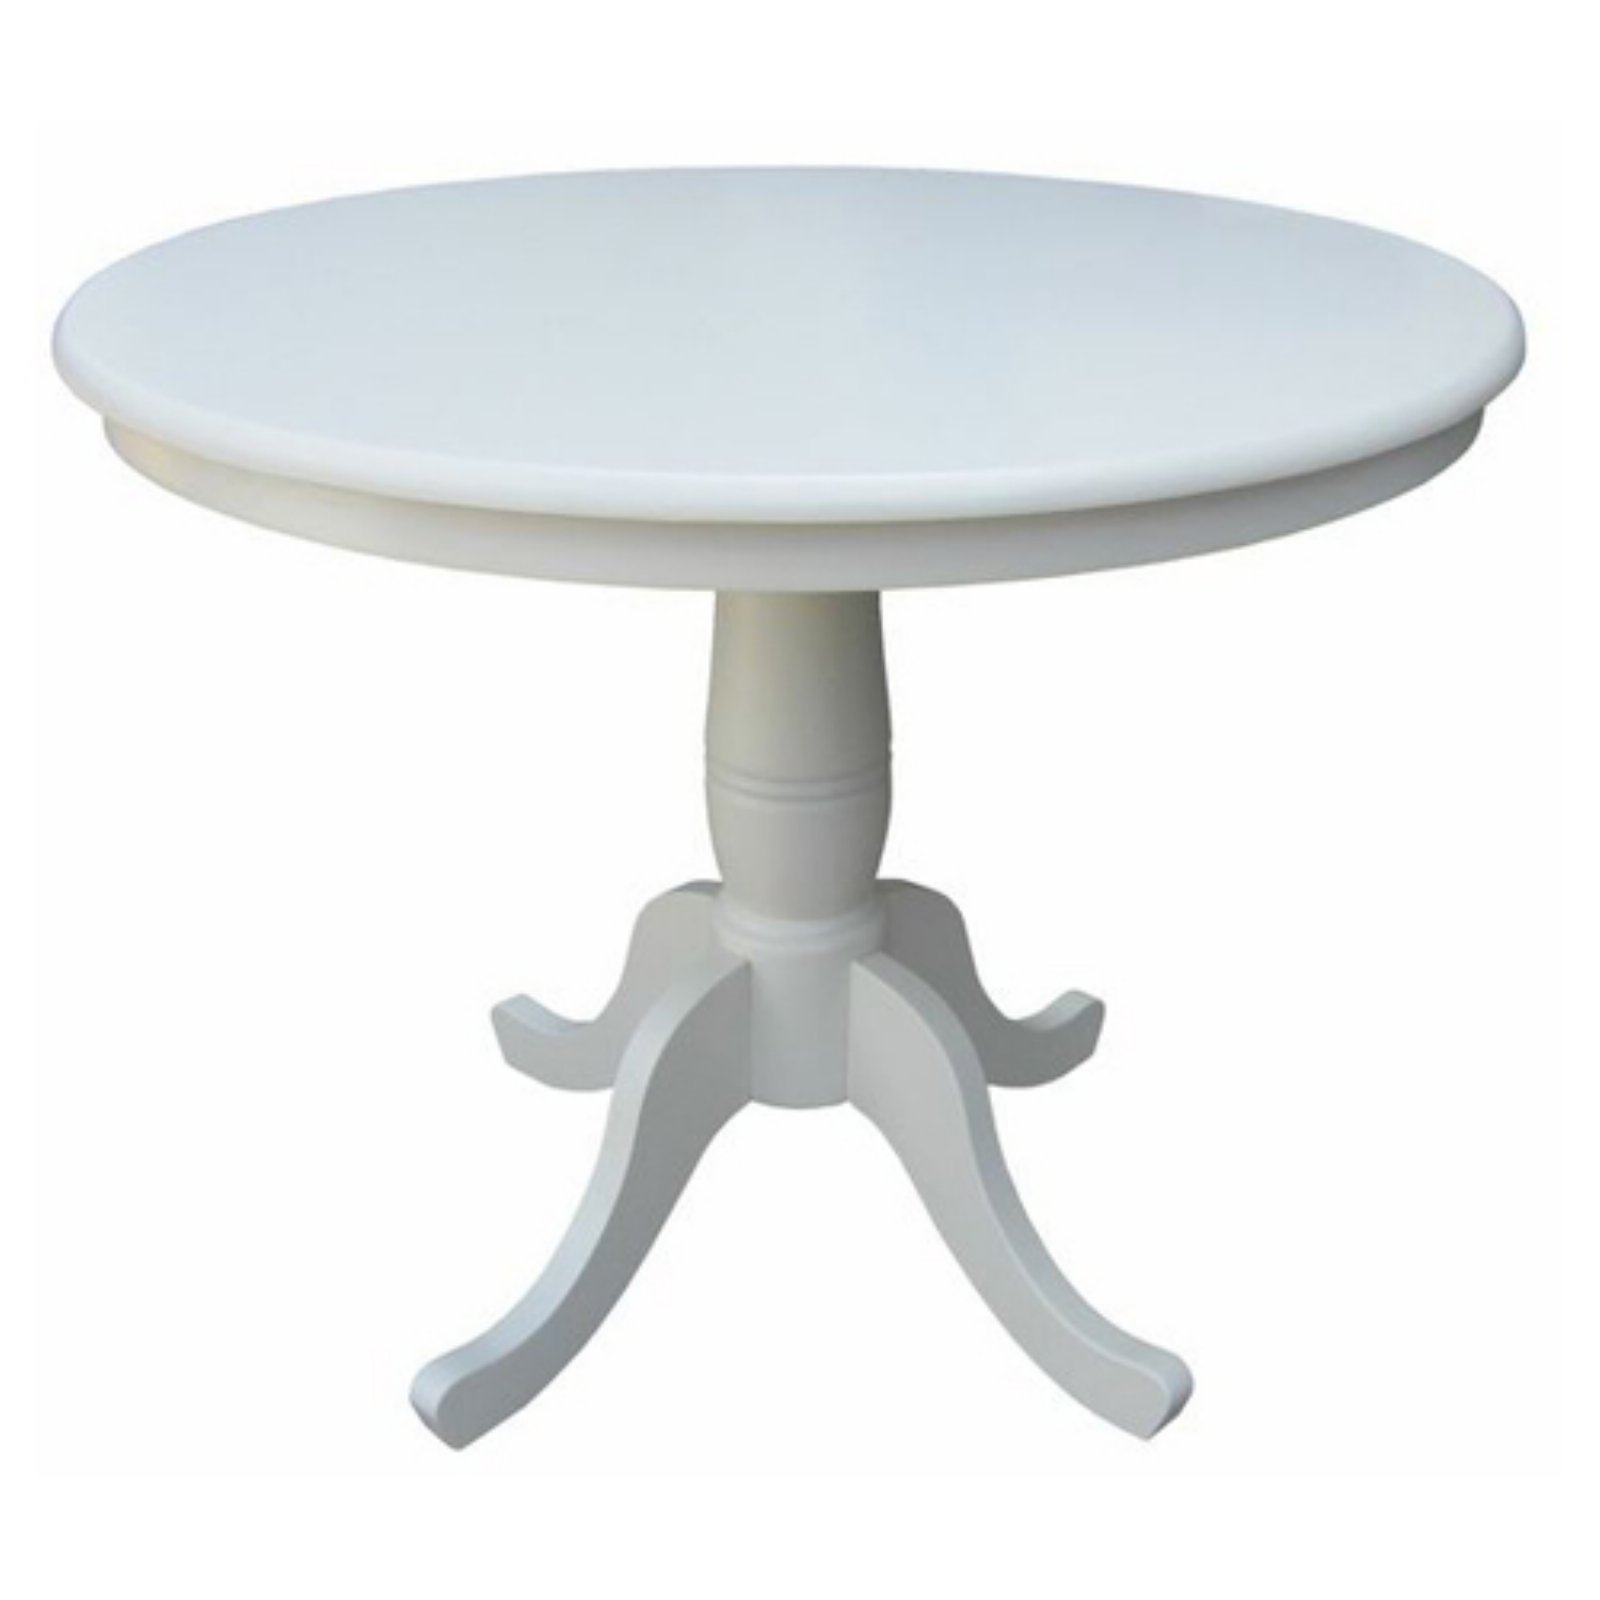 36 Round Pedestal Dining Table Solid Wood White Base Top Furniture Kitchen Sale